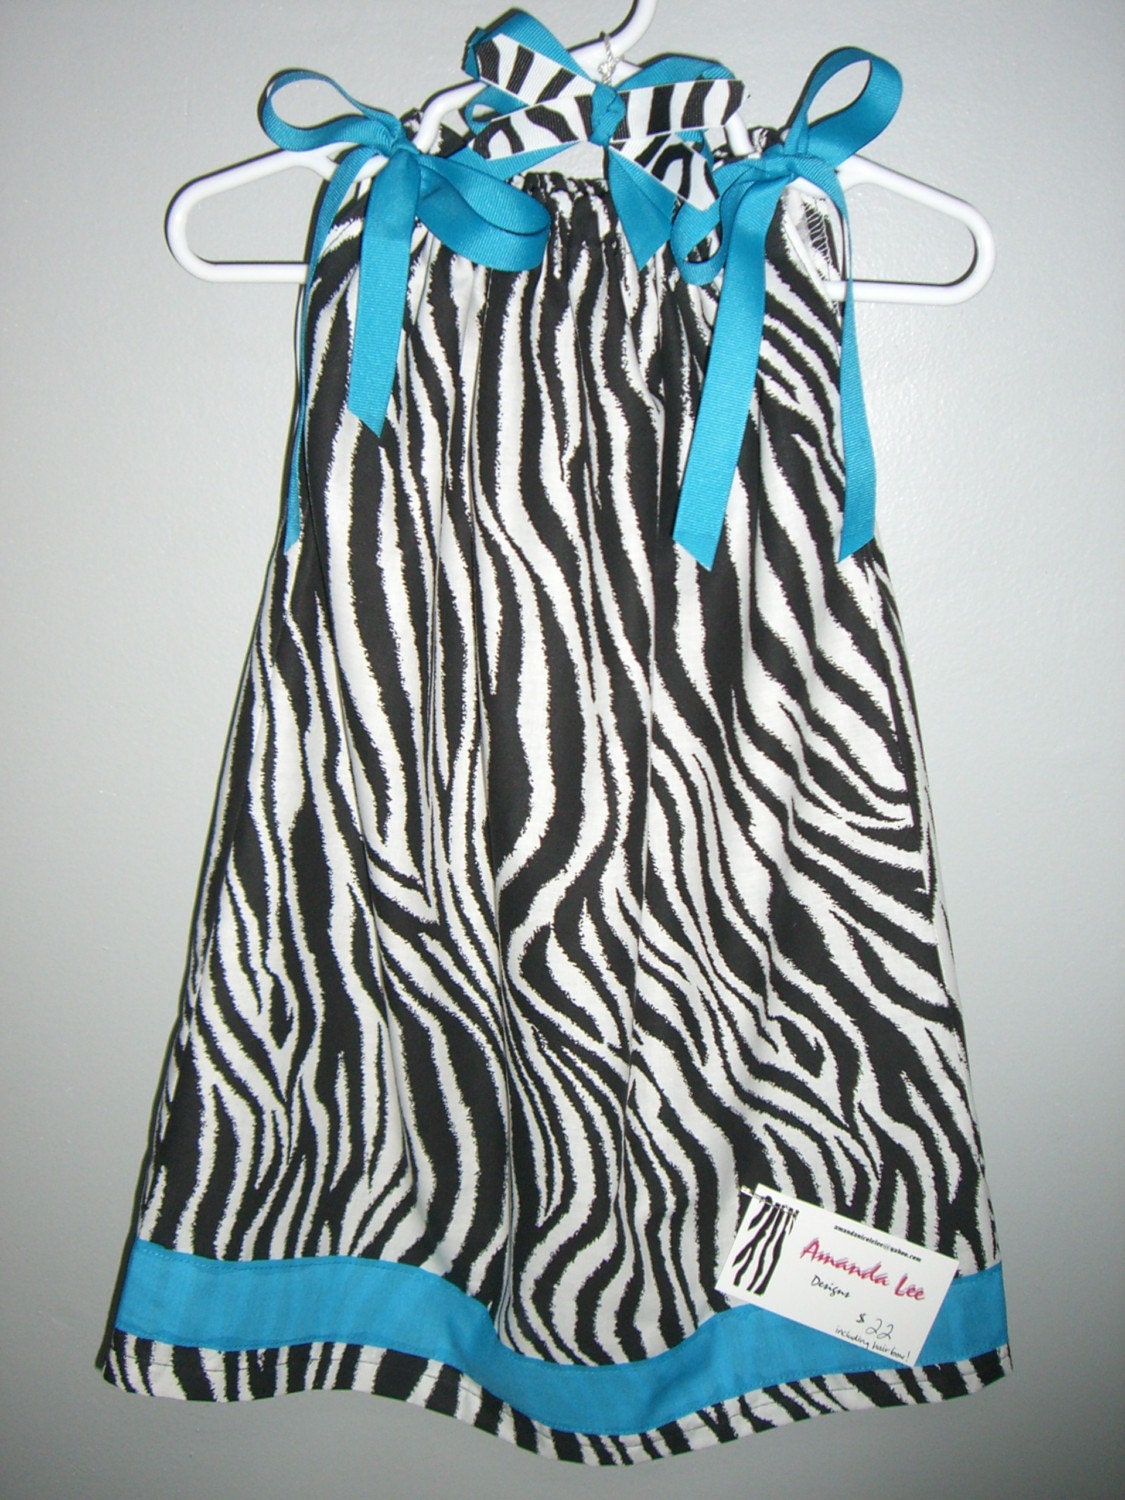 Turquoise Blue and Zebra Pillowcase dress - with matching Hair Bow